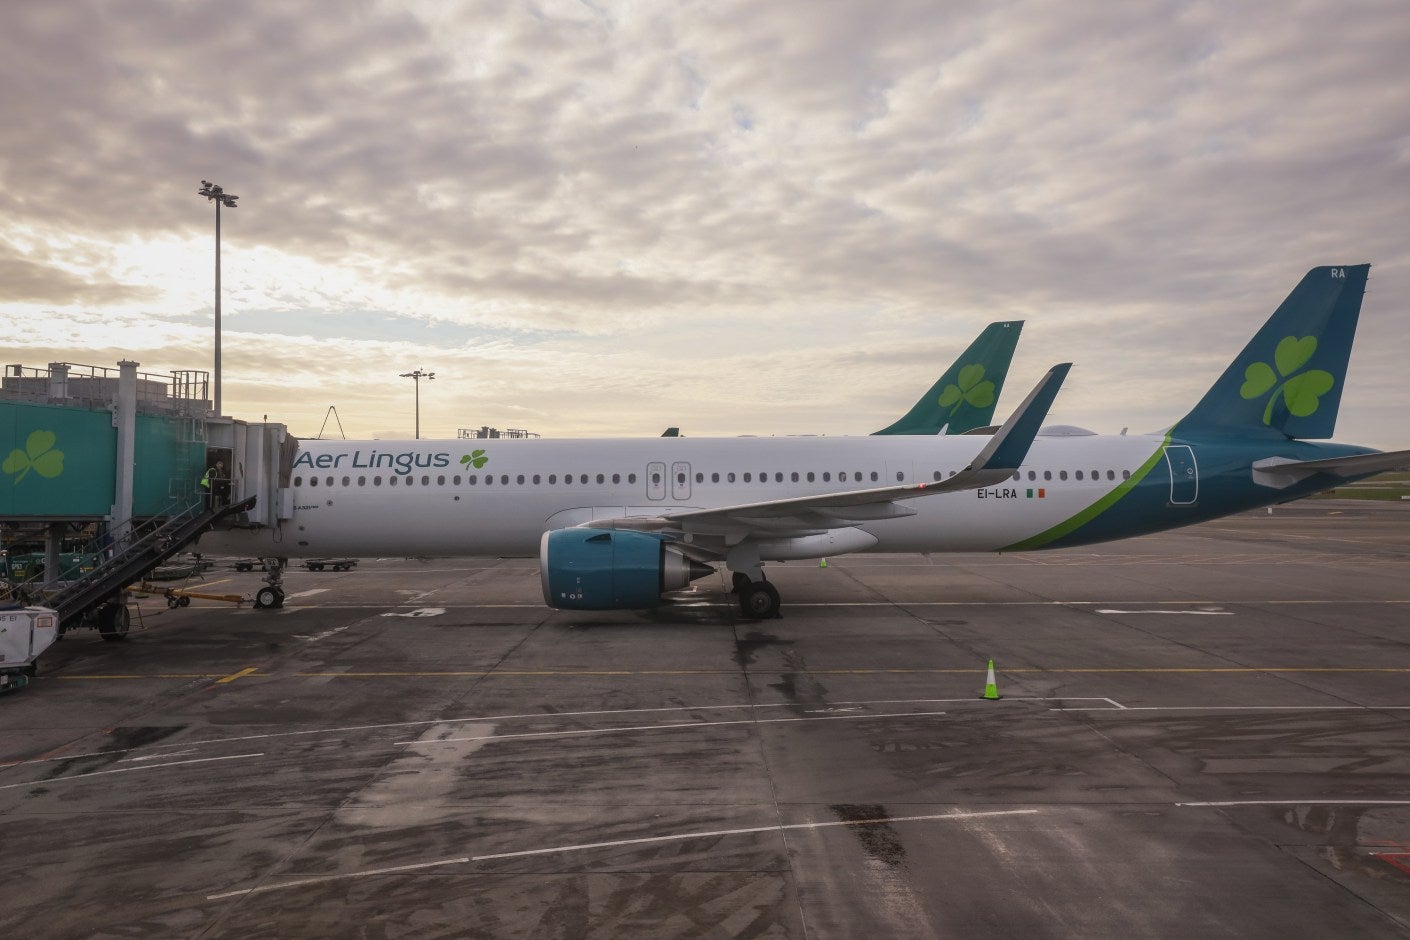 Aer Lingus A321neo at gate in DUB